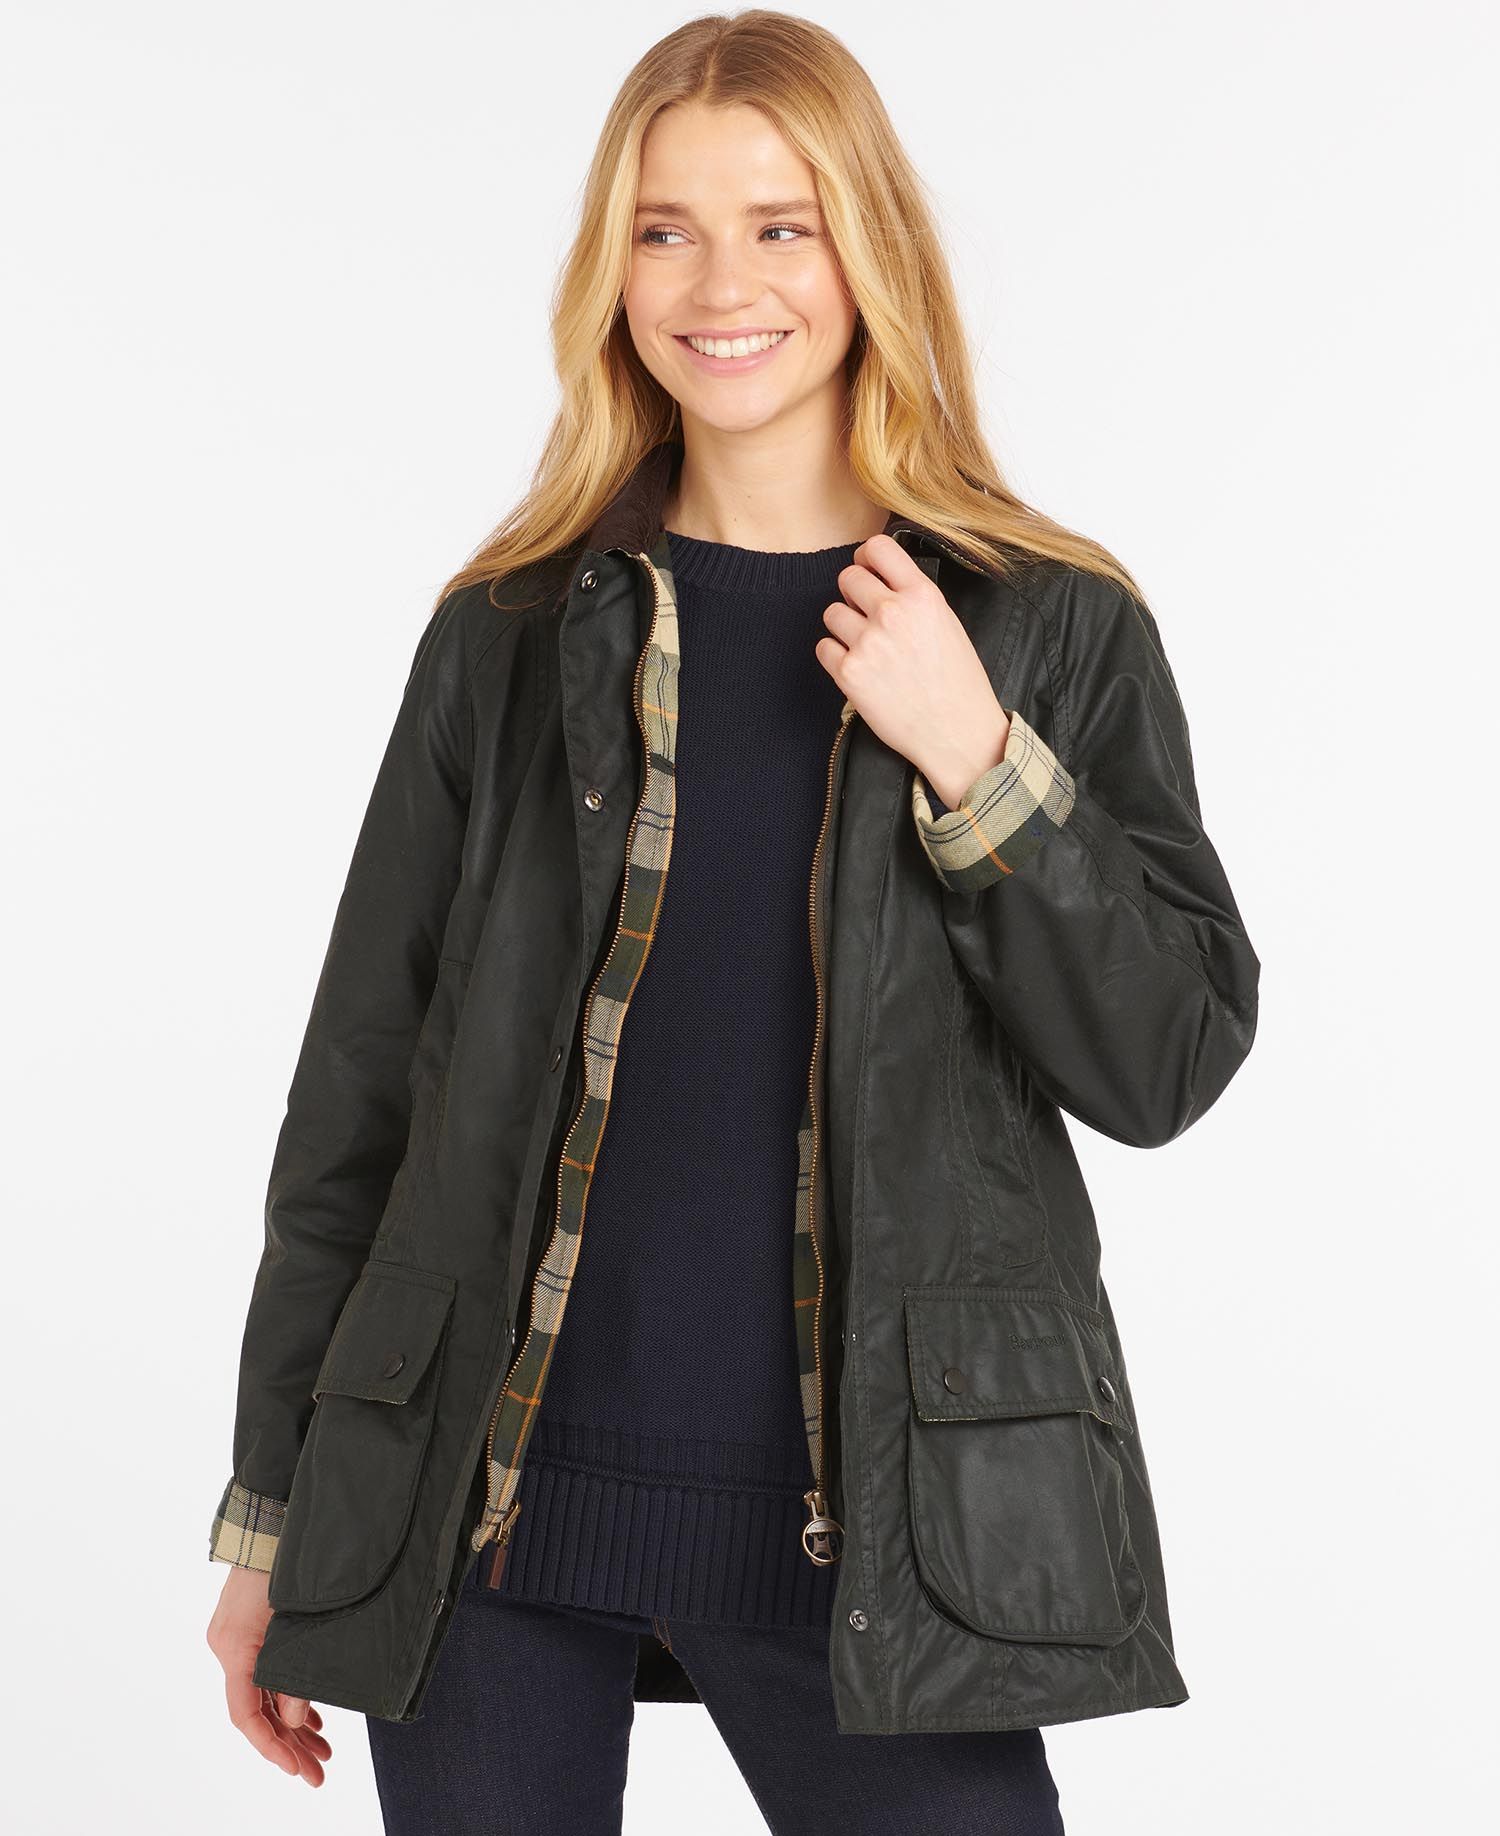 Barbour – Beadnell Wax Jacket – Sage – The Jail Dornoch